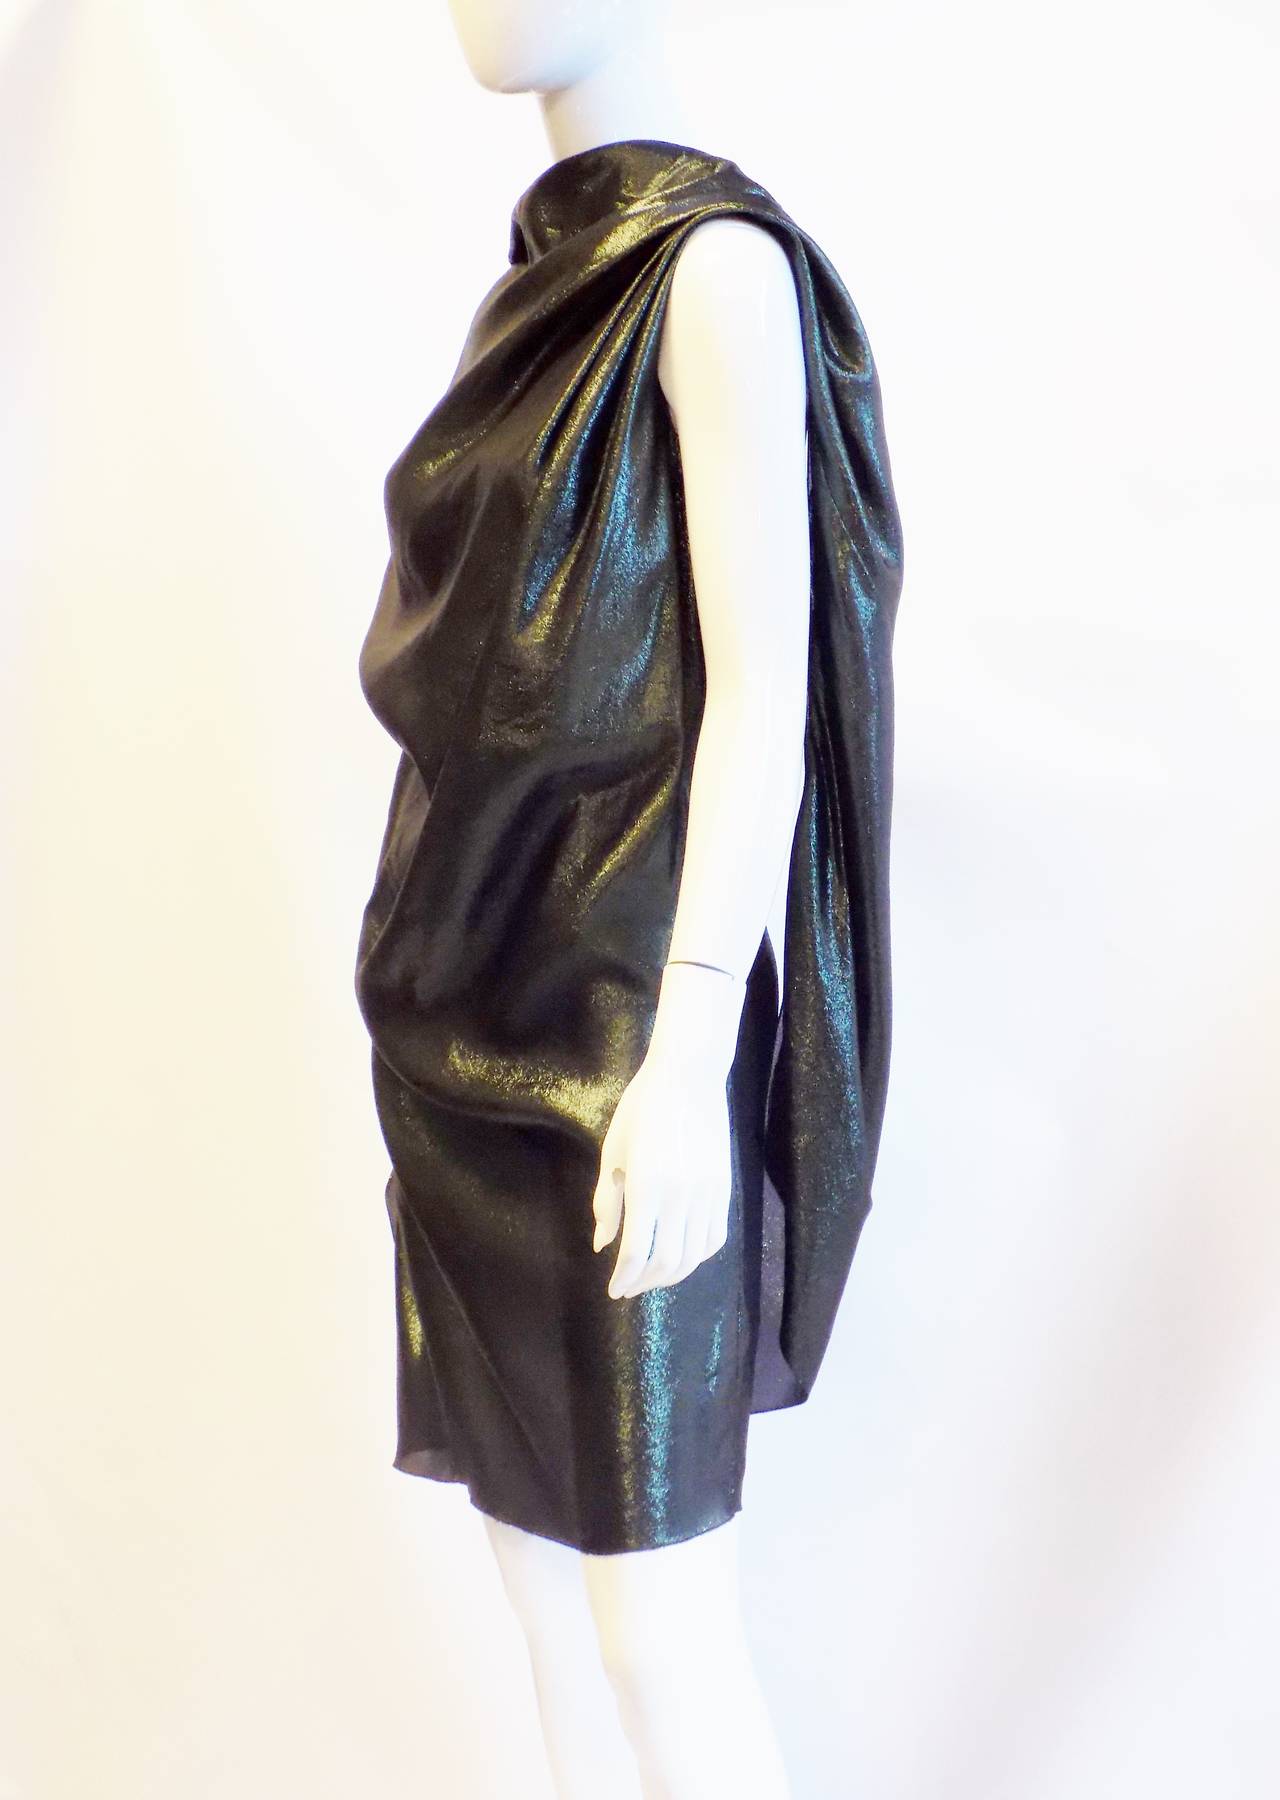 Lanvin dress in washed metallic fabric.Collection winter 2010 . Size wide zipper.     Draped shift silhouette.    Hem hits above the knee.    Silk/polyester.
    Made in France. Size 4
Pristine condition

Lanvin is the oldest French house of